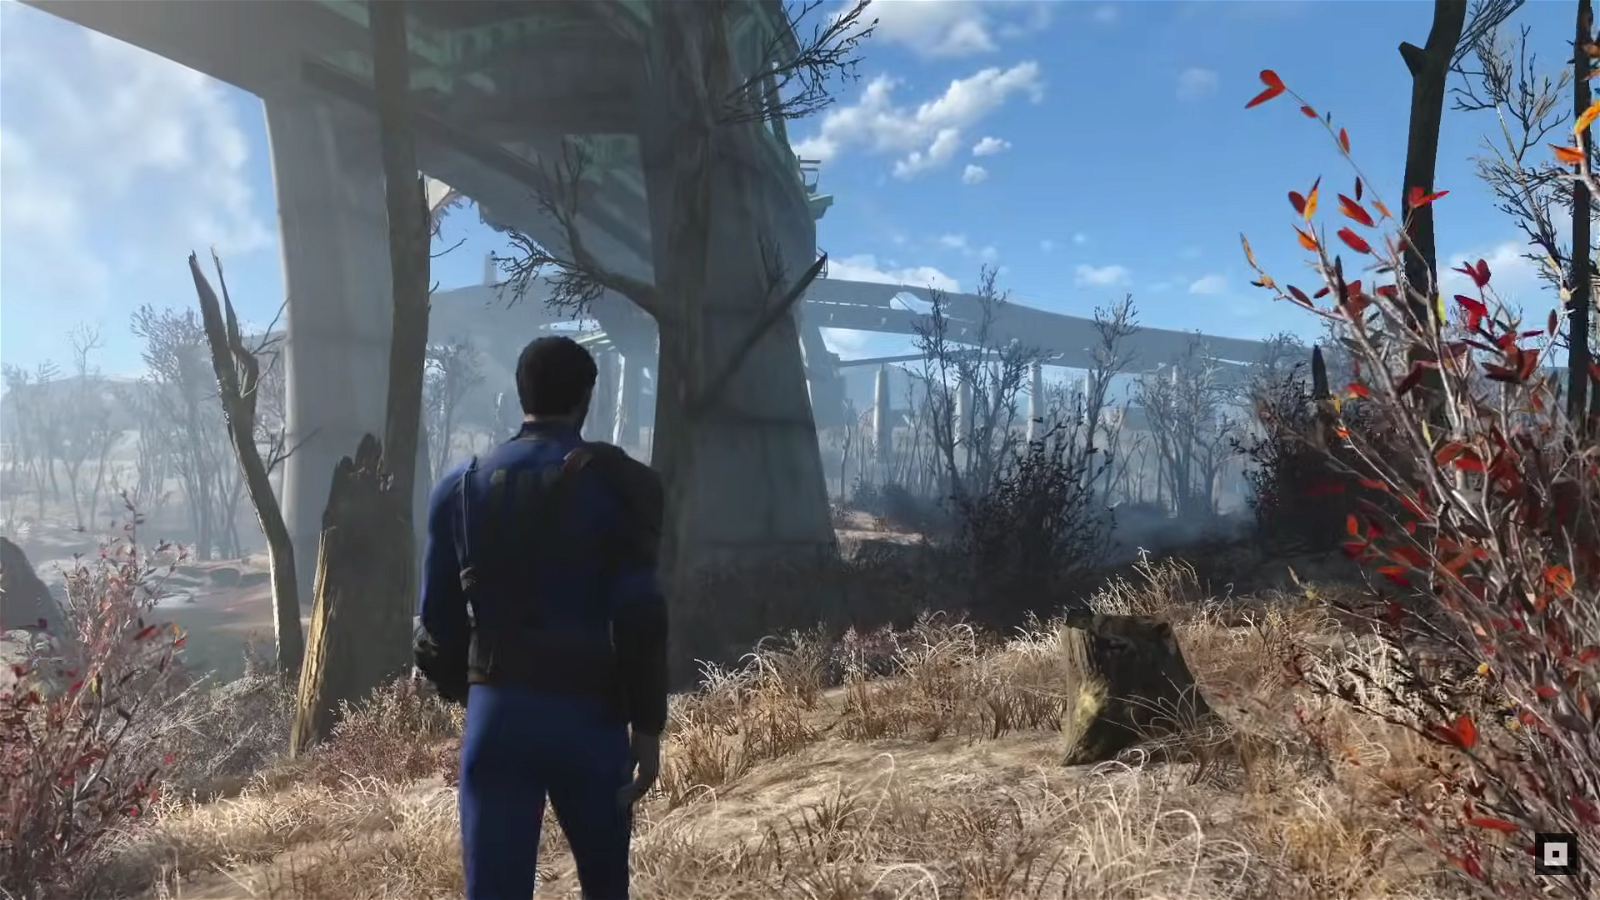 Fallout 4's male protagonist is not a newcomer to the wasteland.